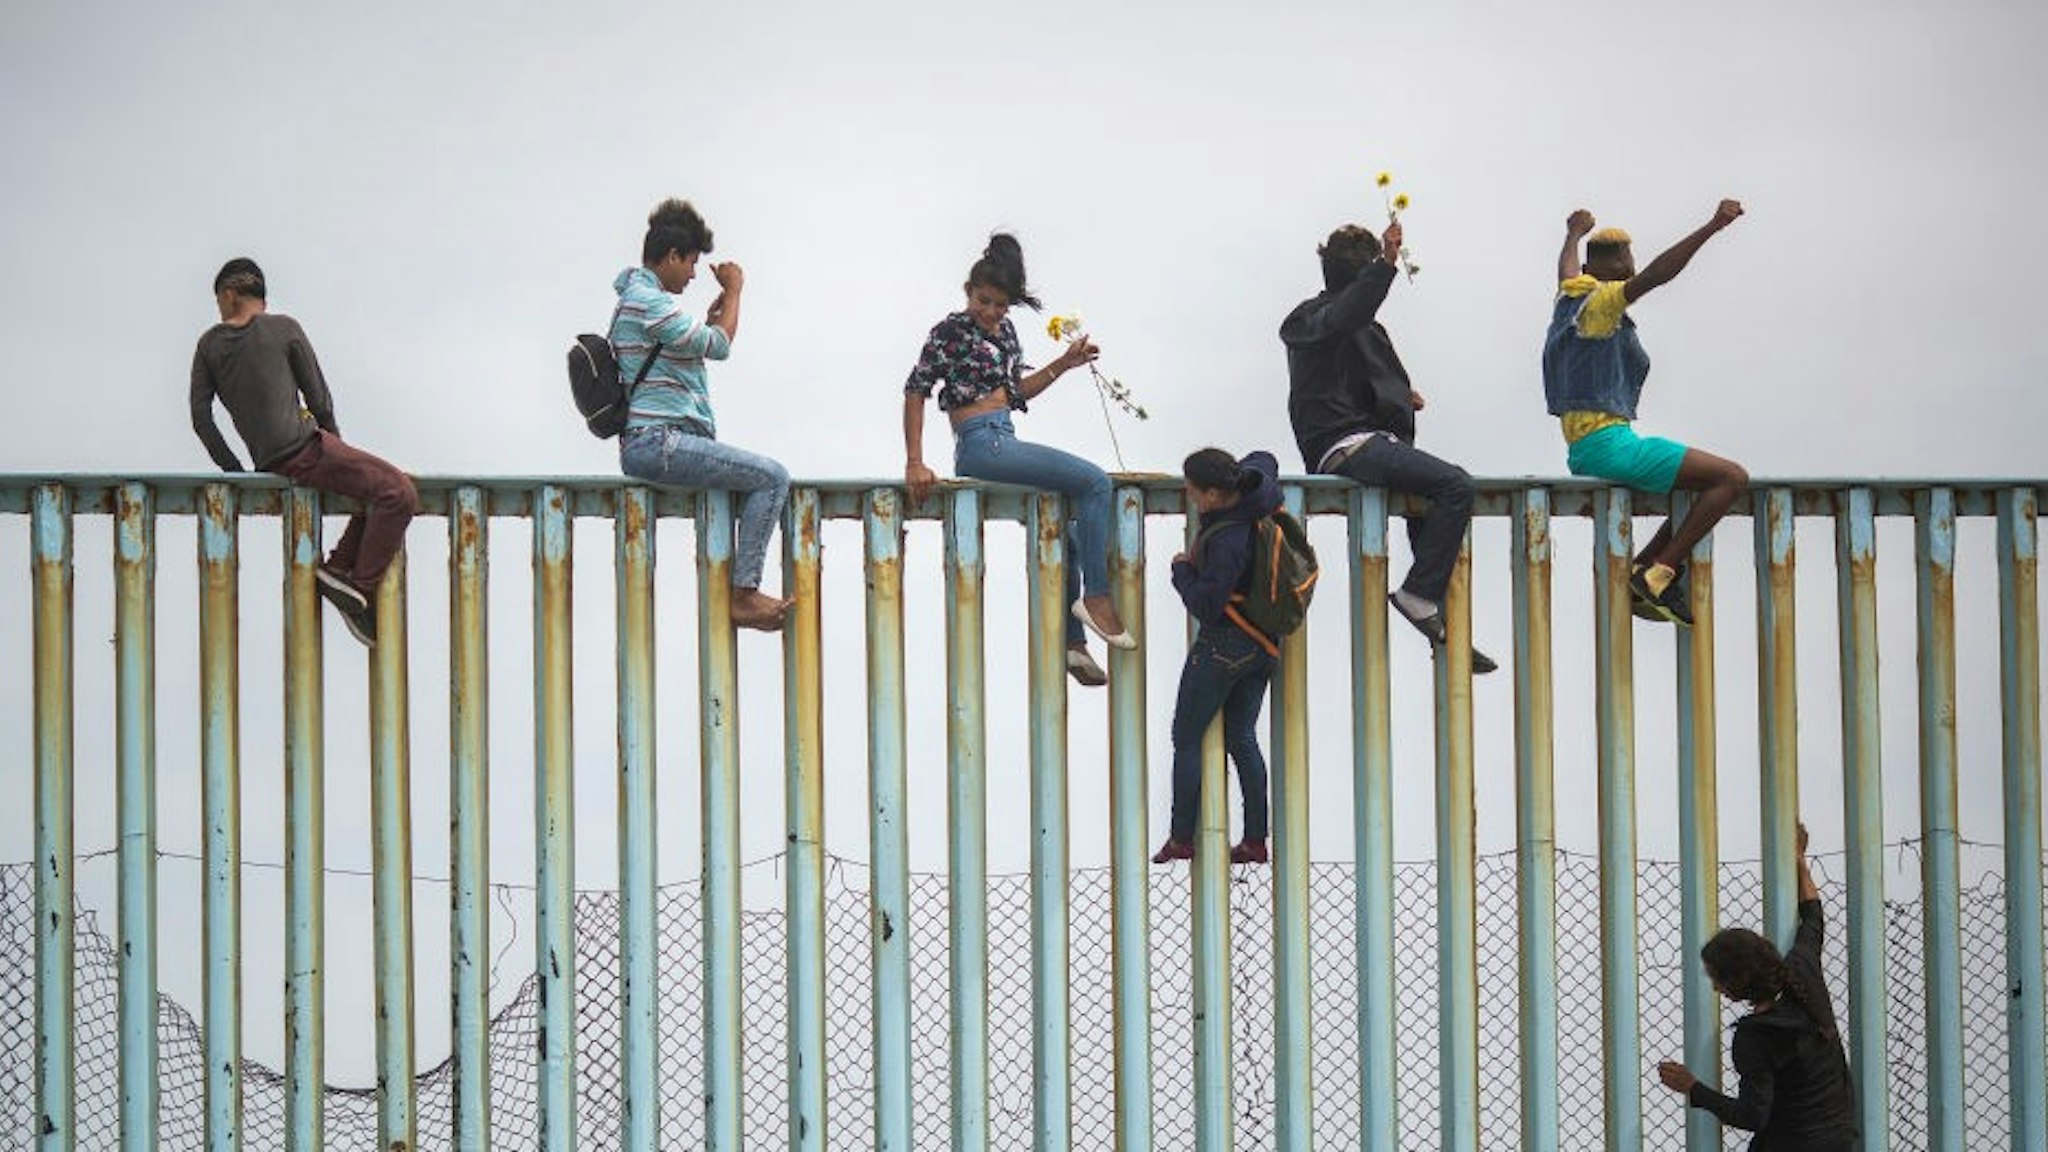 People climb a section of border fence to look toward supporters in the U.S. as members of a caravan of Central American asylum seekers arrive to a rally on April 29, 2018 in Tijuana, Baja California Norte, Mexico.